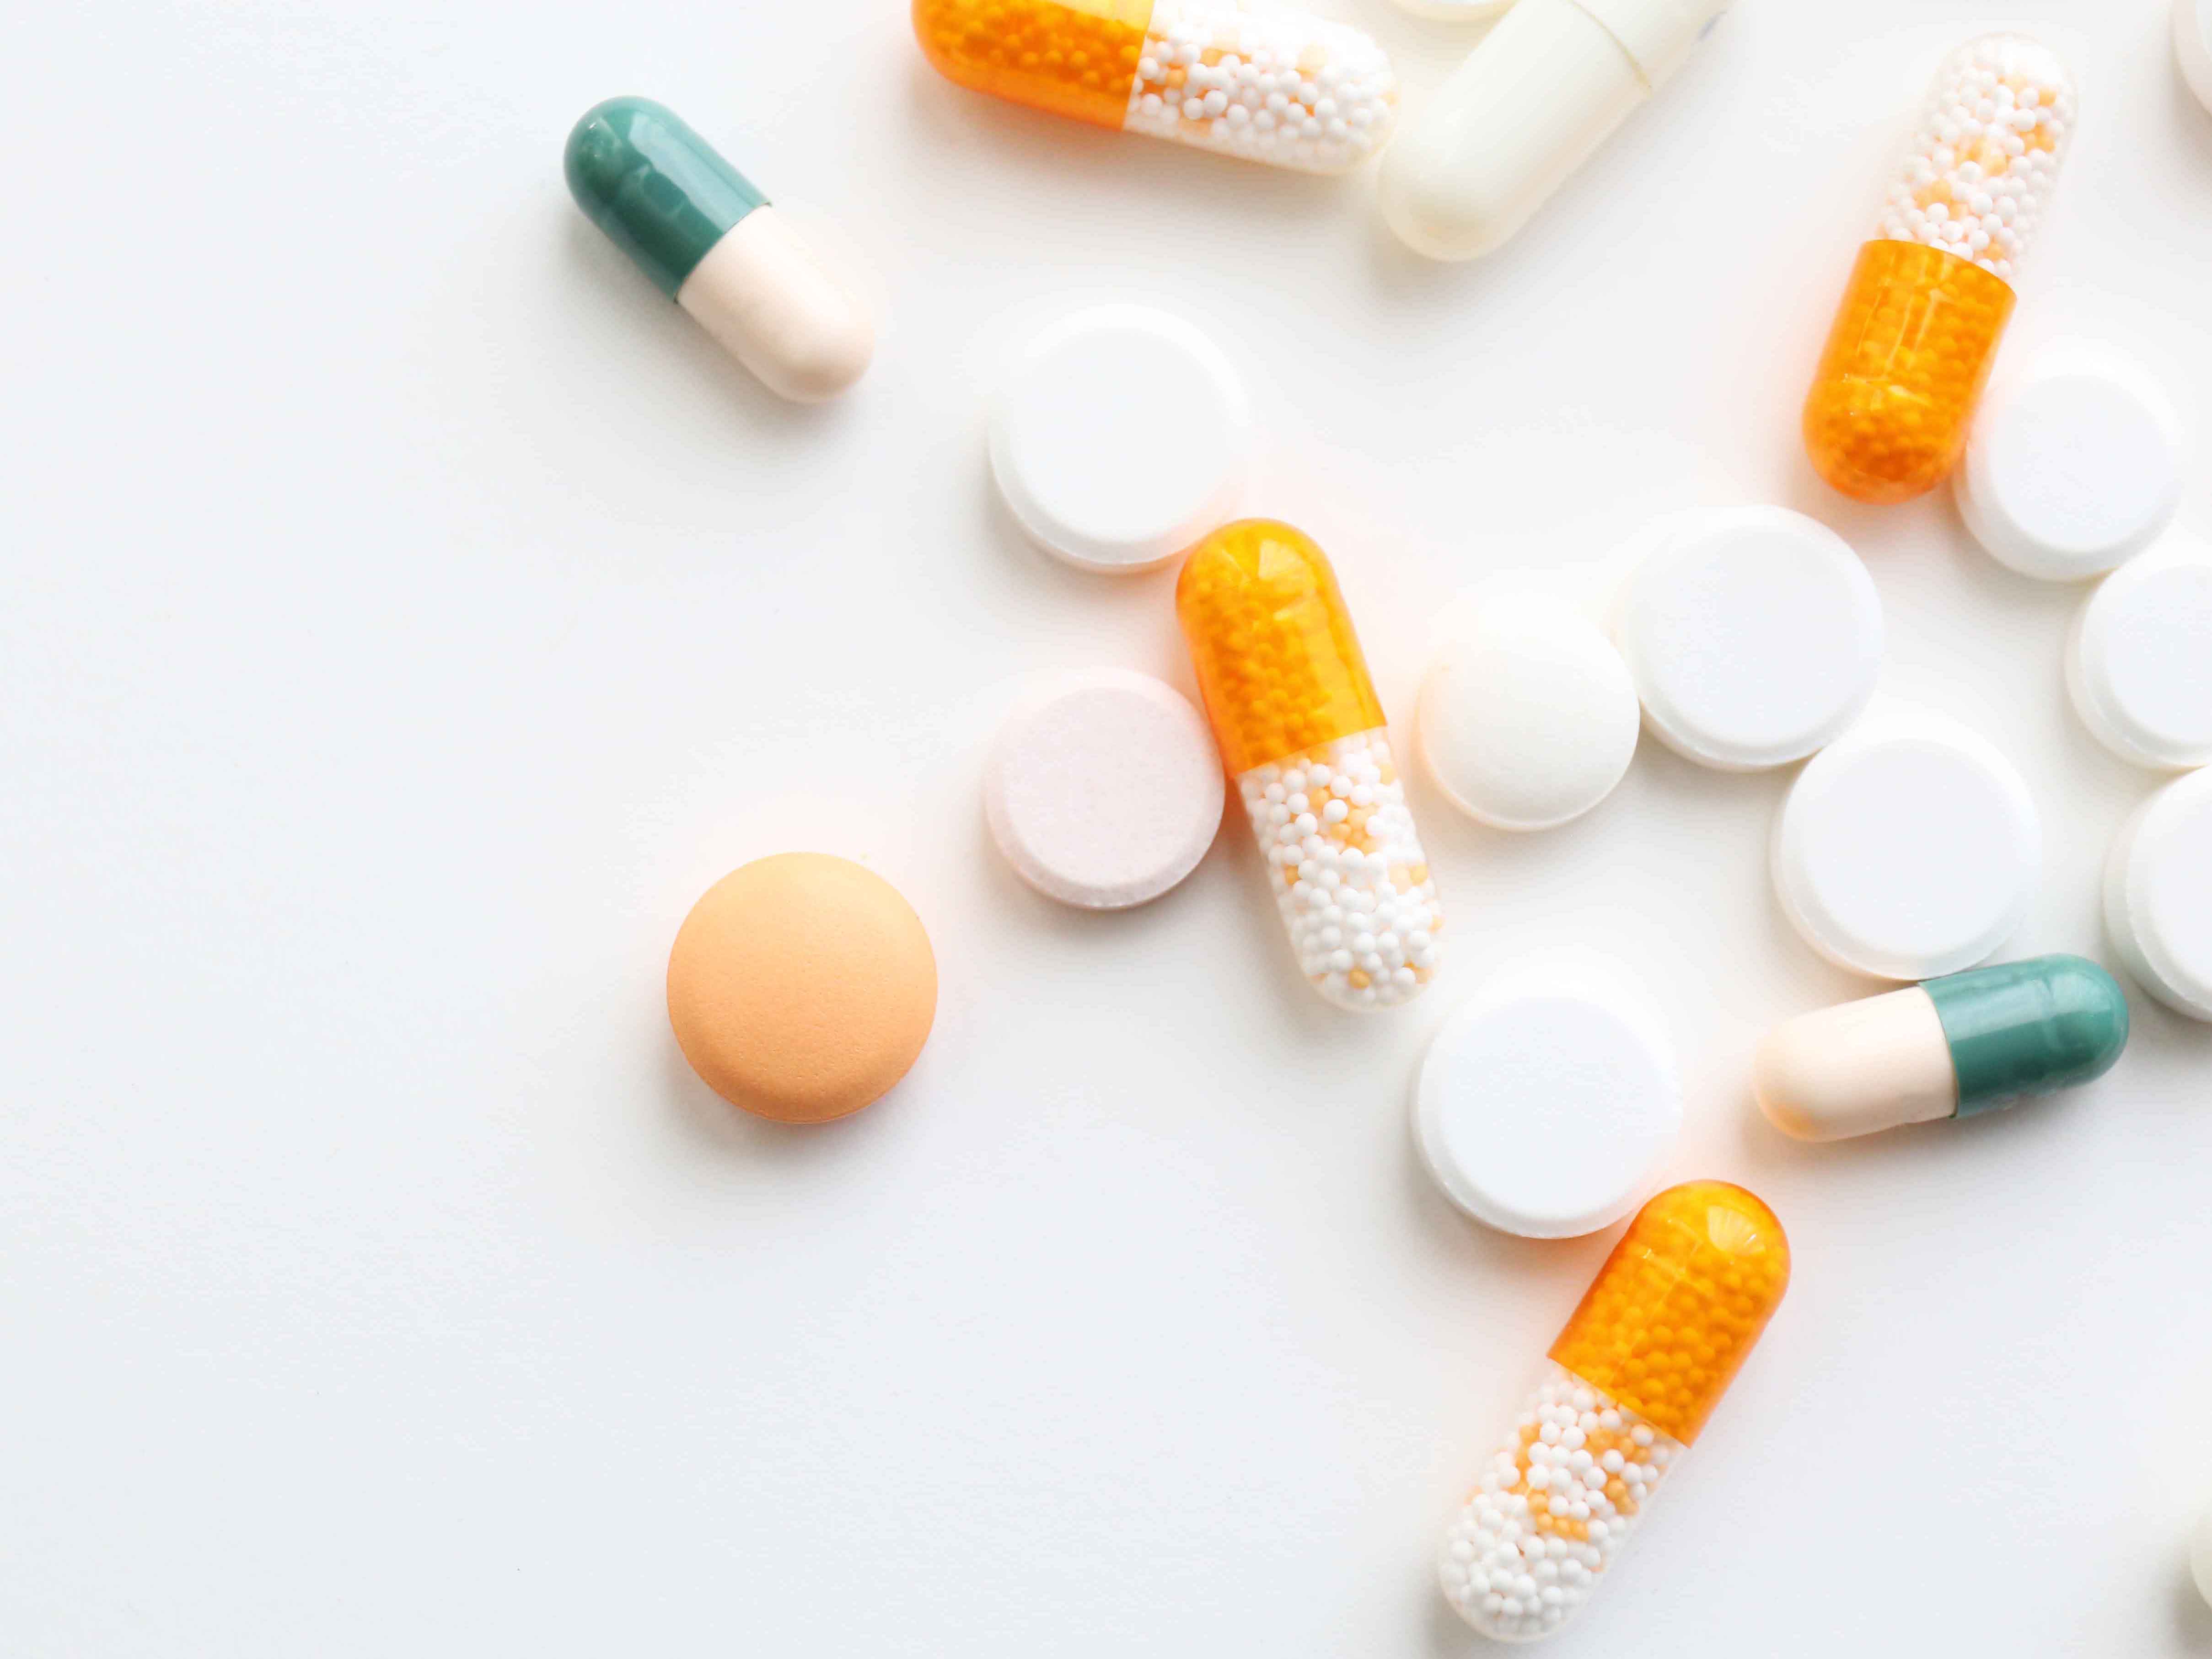 Why the Excipients Market Needs to Embrace the New Normal